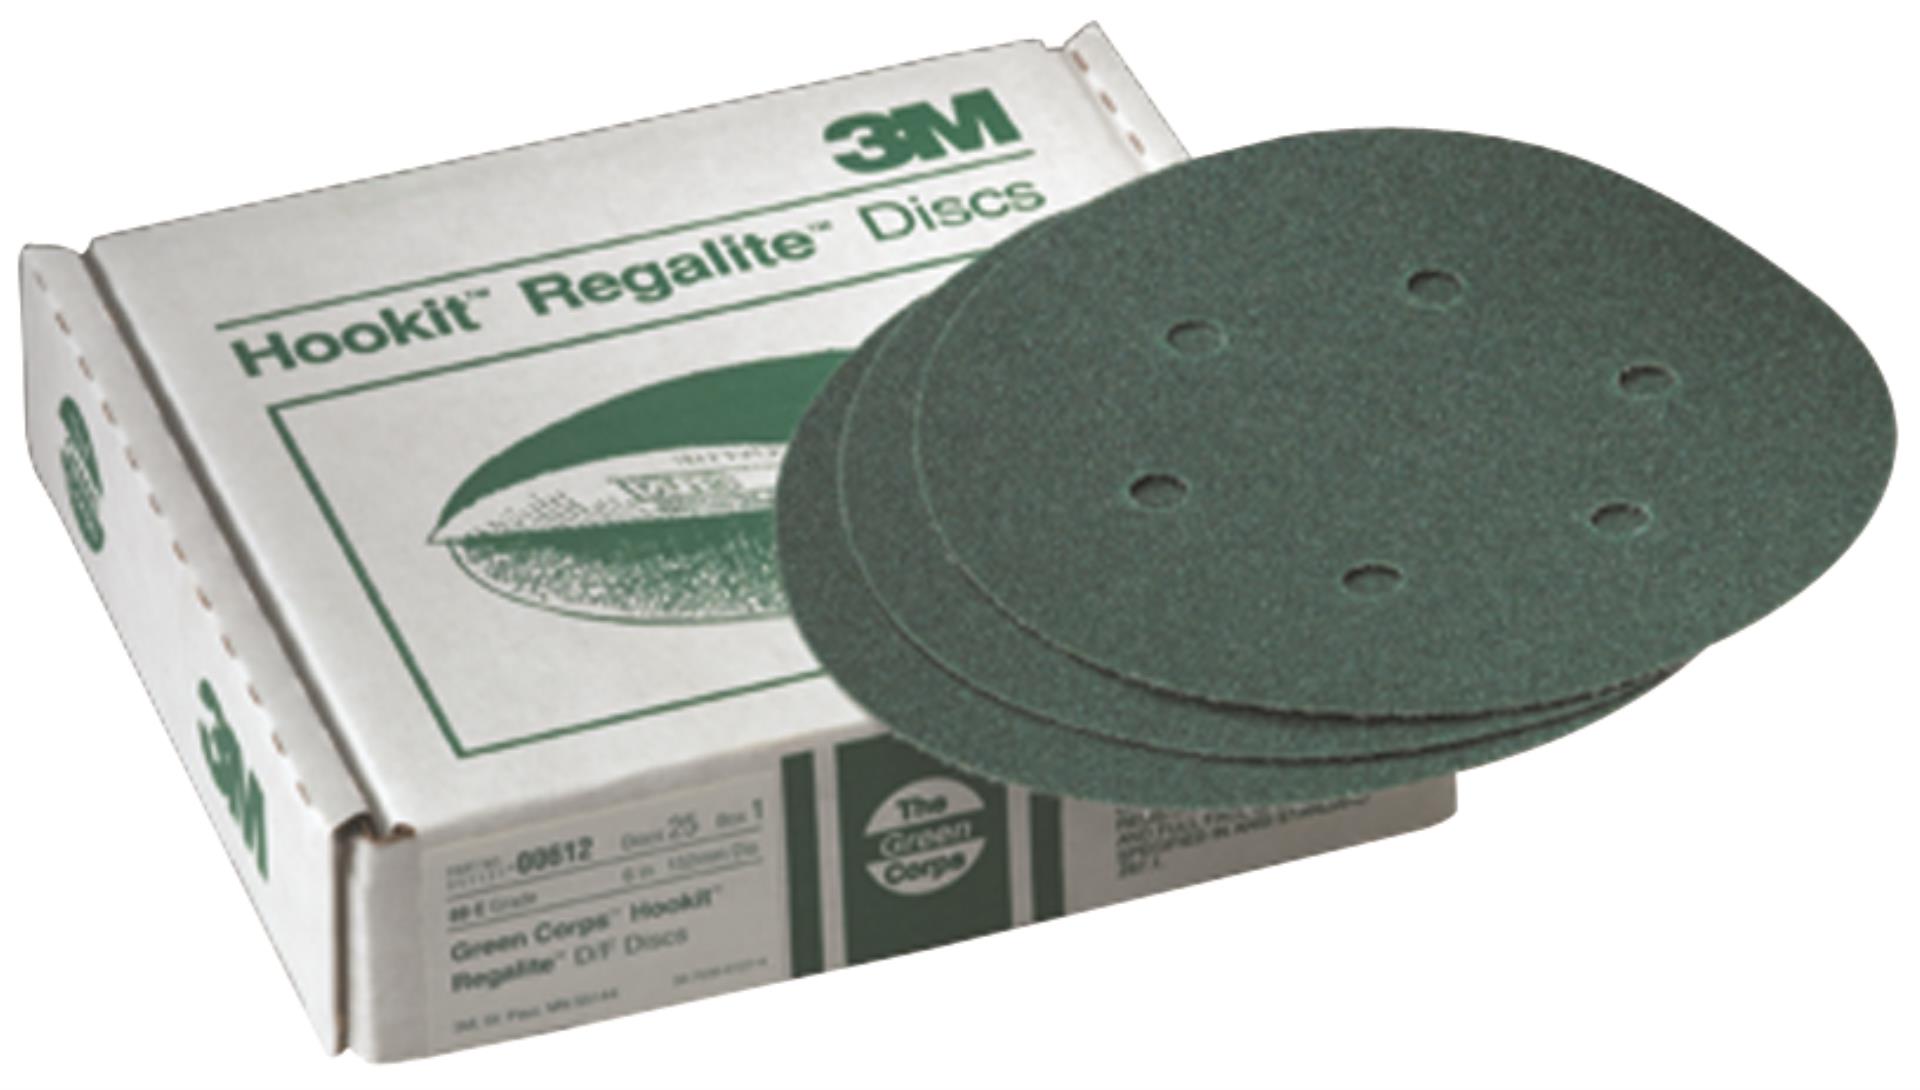 3M Post-it 1.8" Diameter Magnetic Grip Discs 2 Per Pack Free Very Fast Shipping 